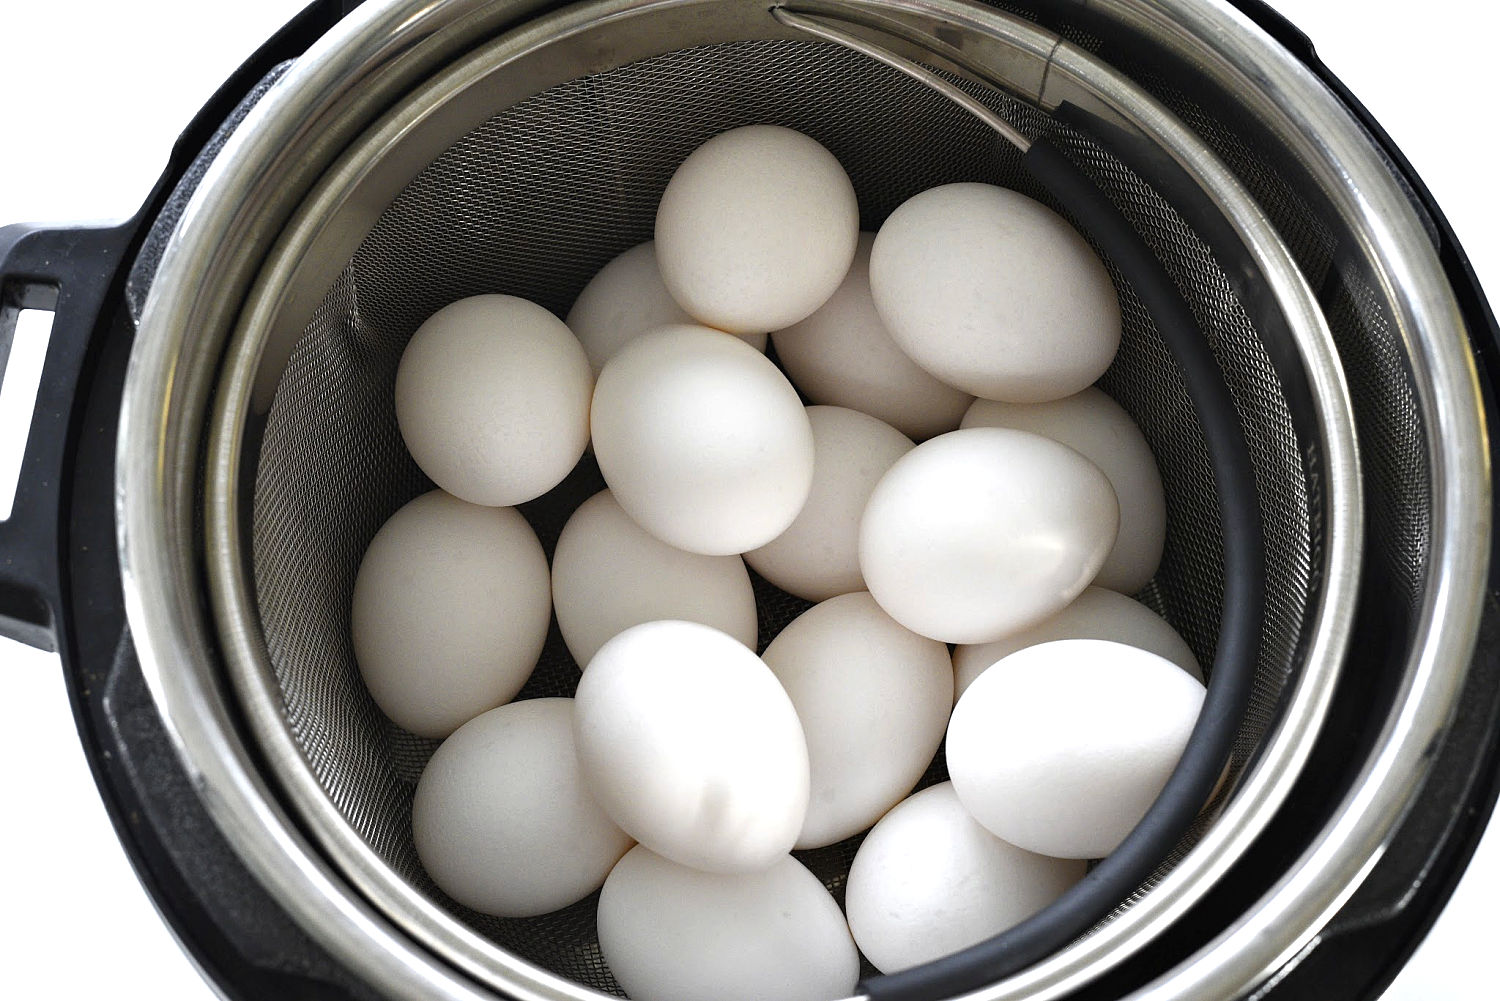 A pot full of eggs sitting in a pressure cooker